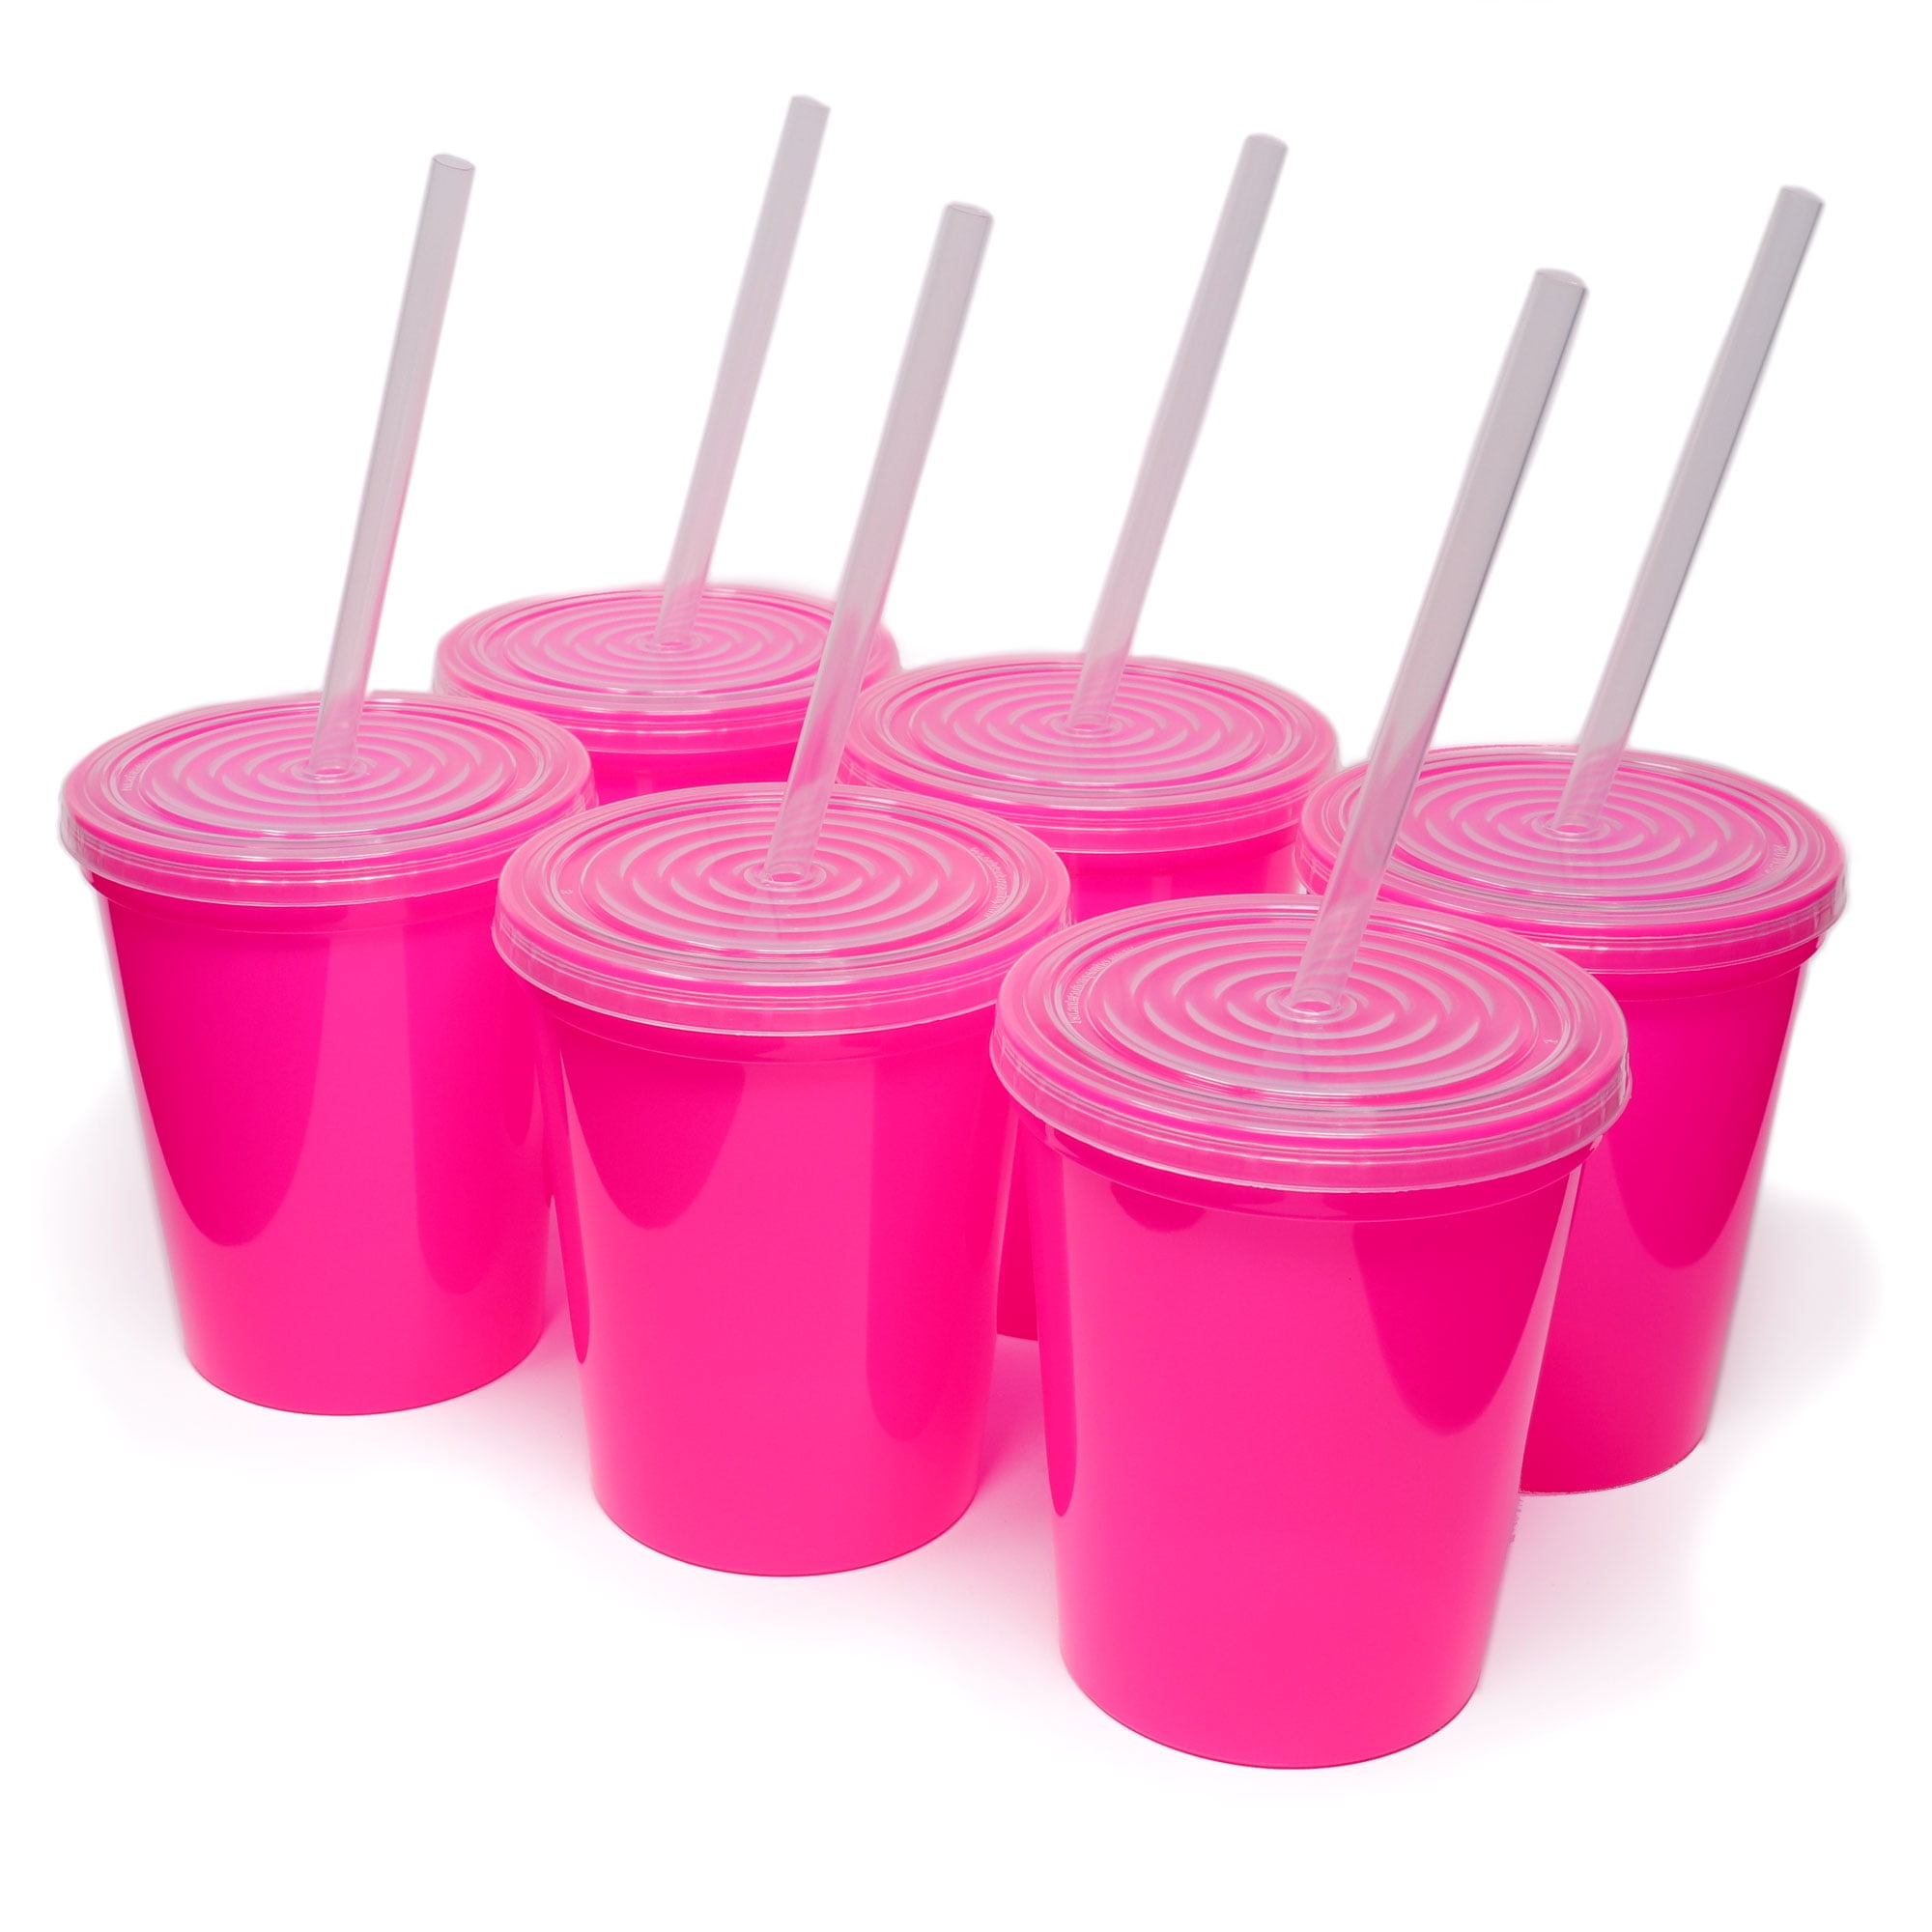 HotSips Reusable Drinking Straws, Unique Design for All Tumblers and Cups, Cold or Hot Beverages & Coffee, Portable Design, Dishwasher Safe - Durable